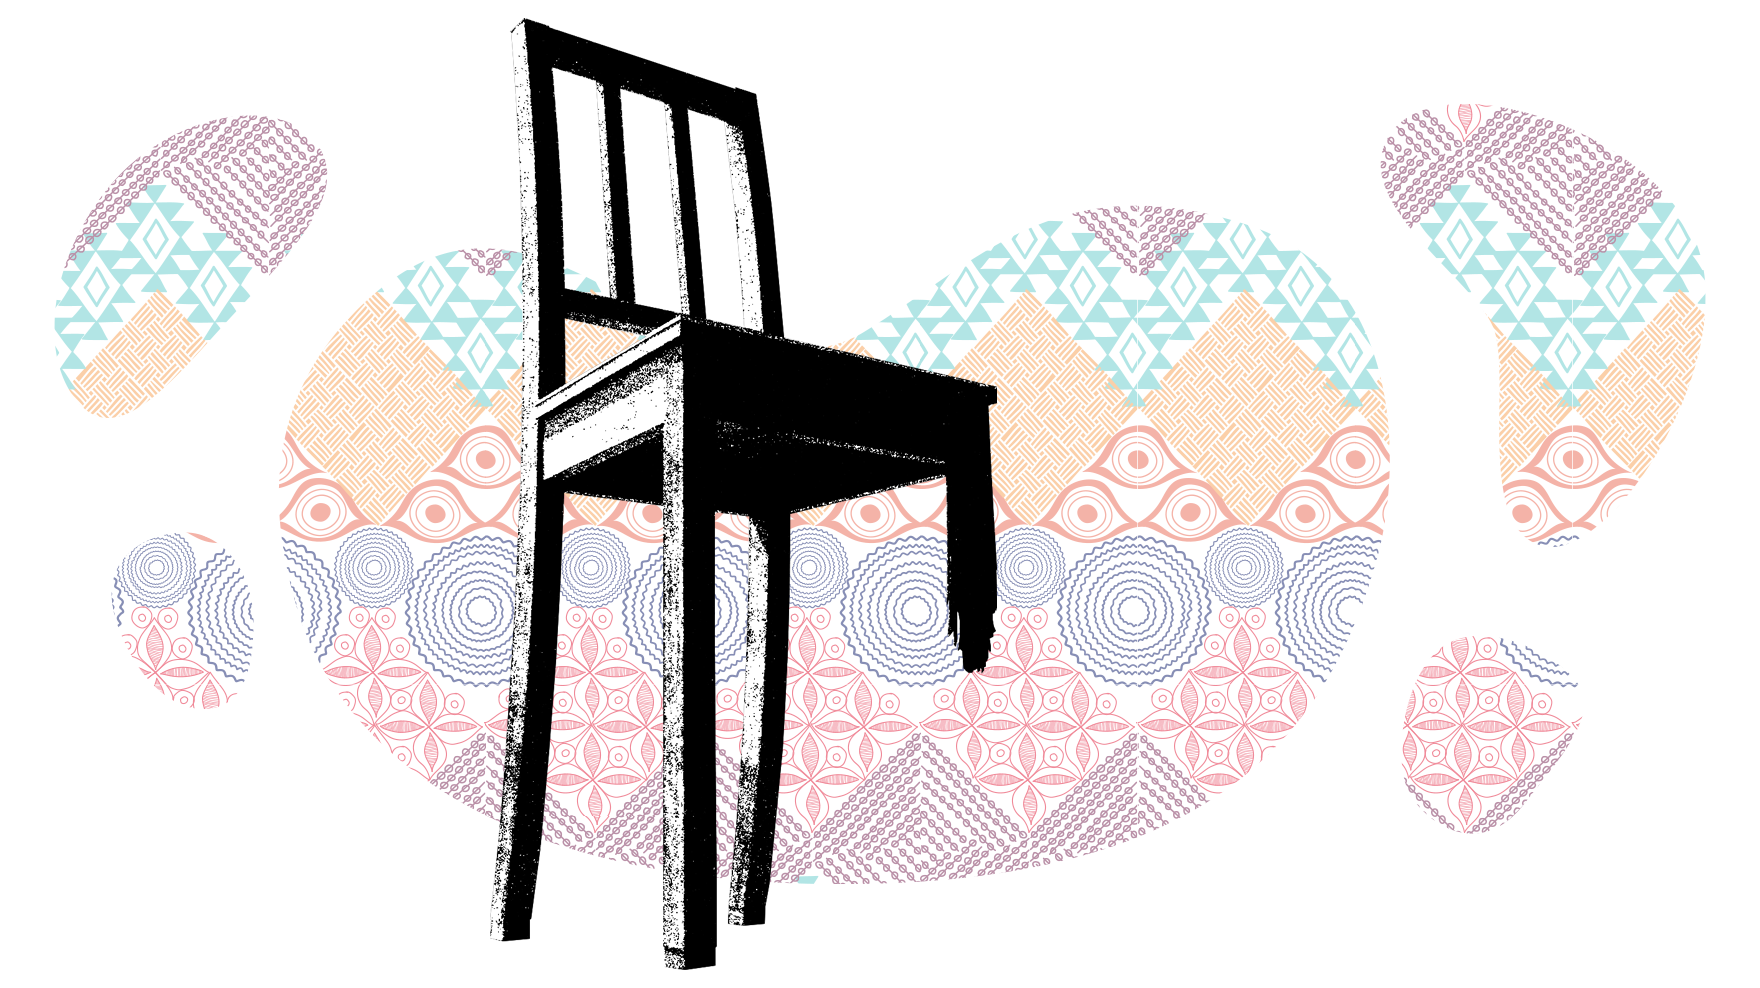 A chair with a broken leg with a patterned background